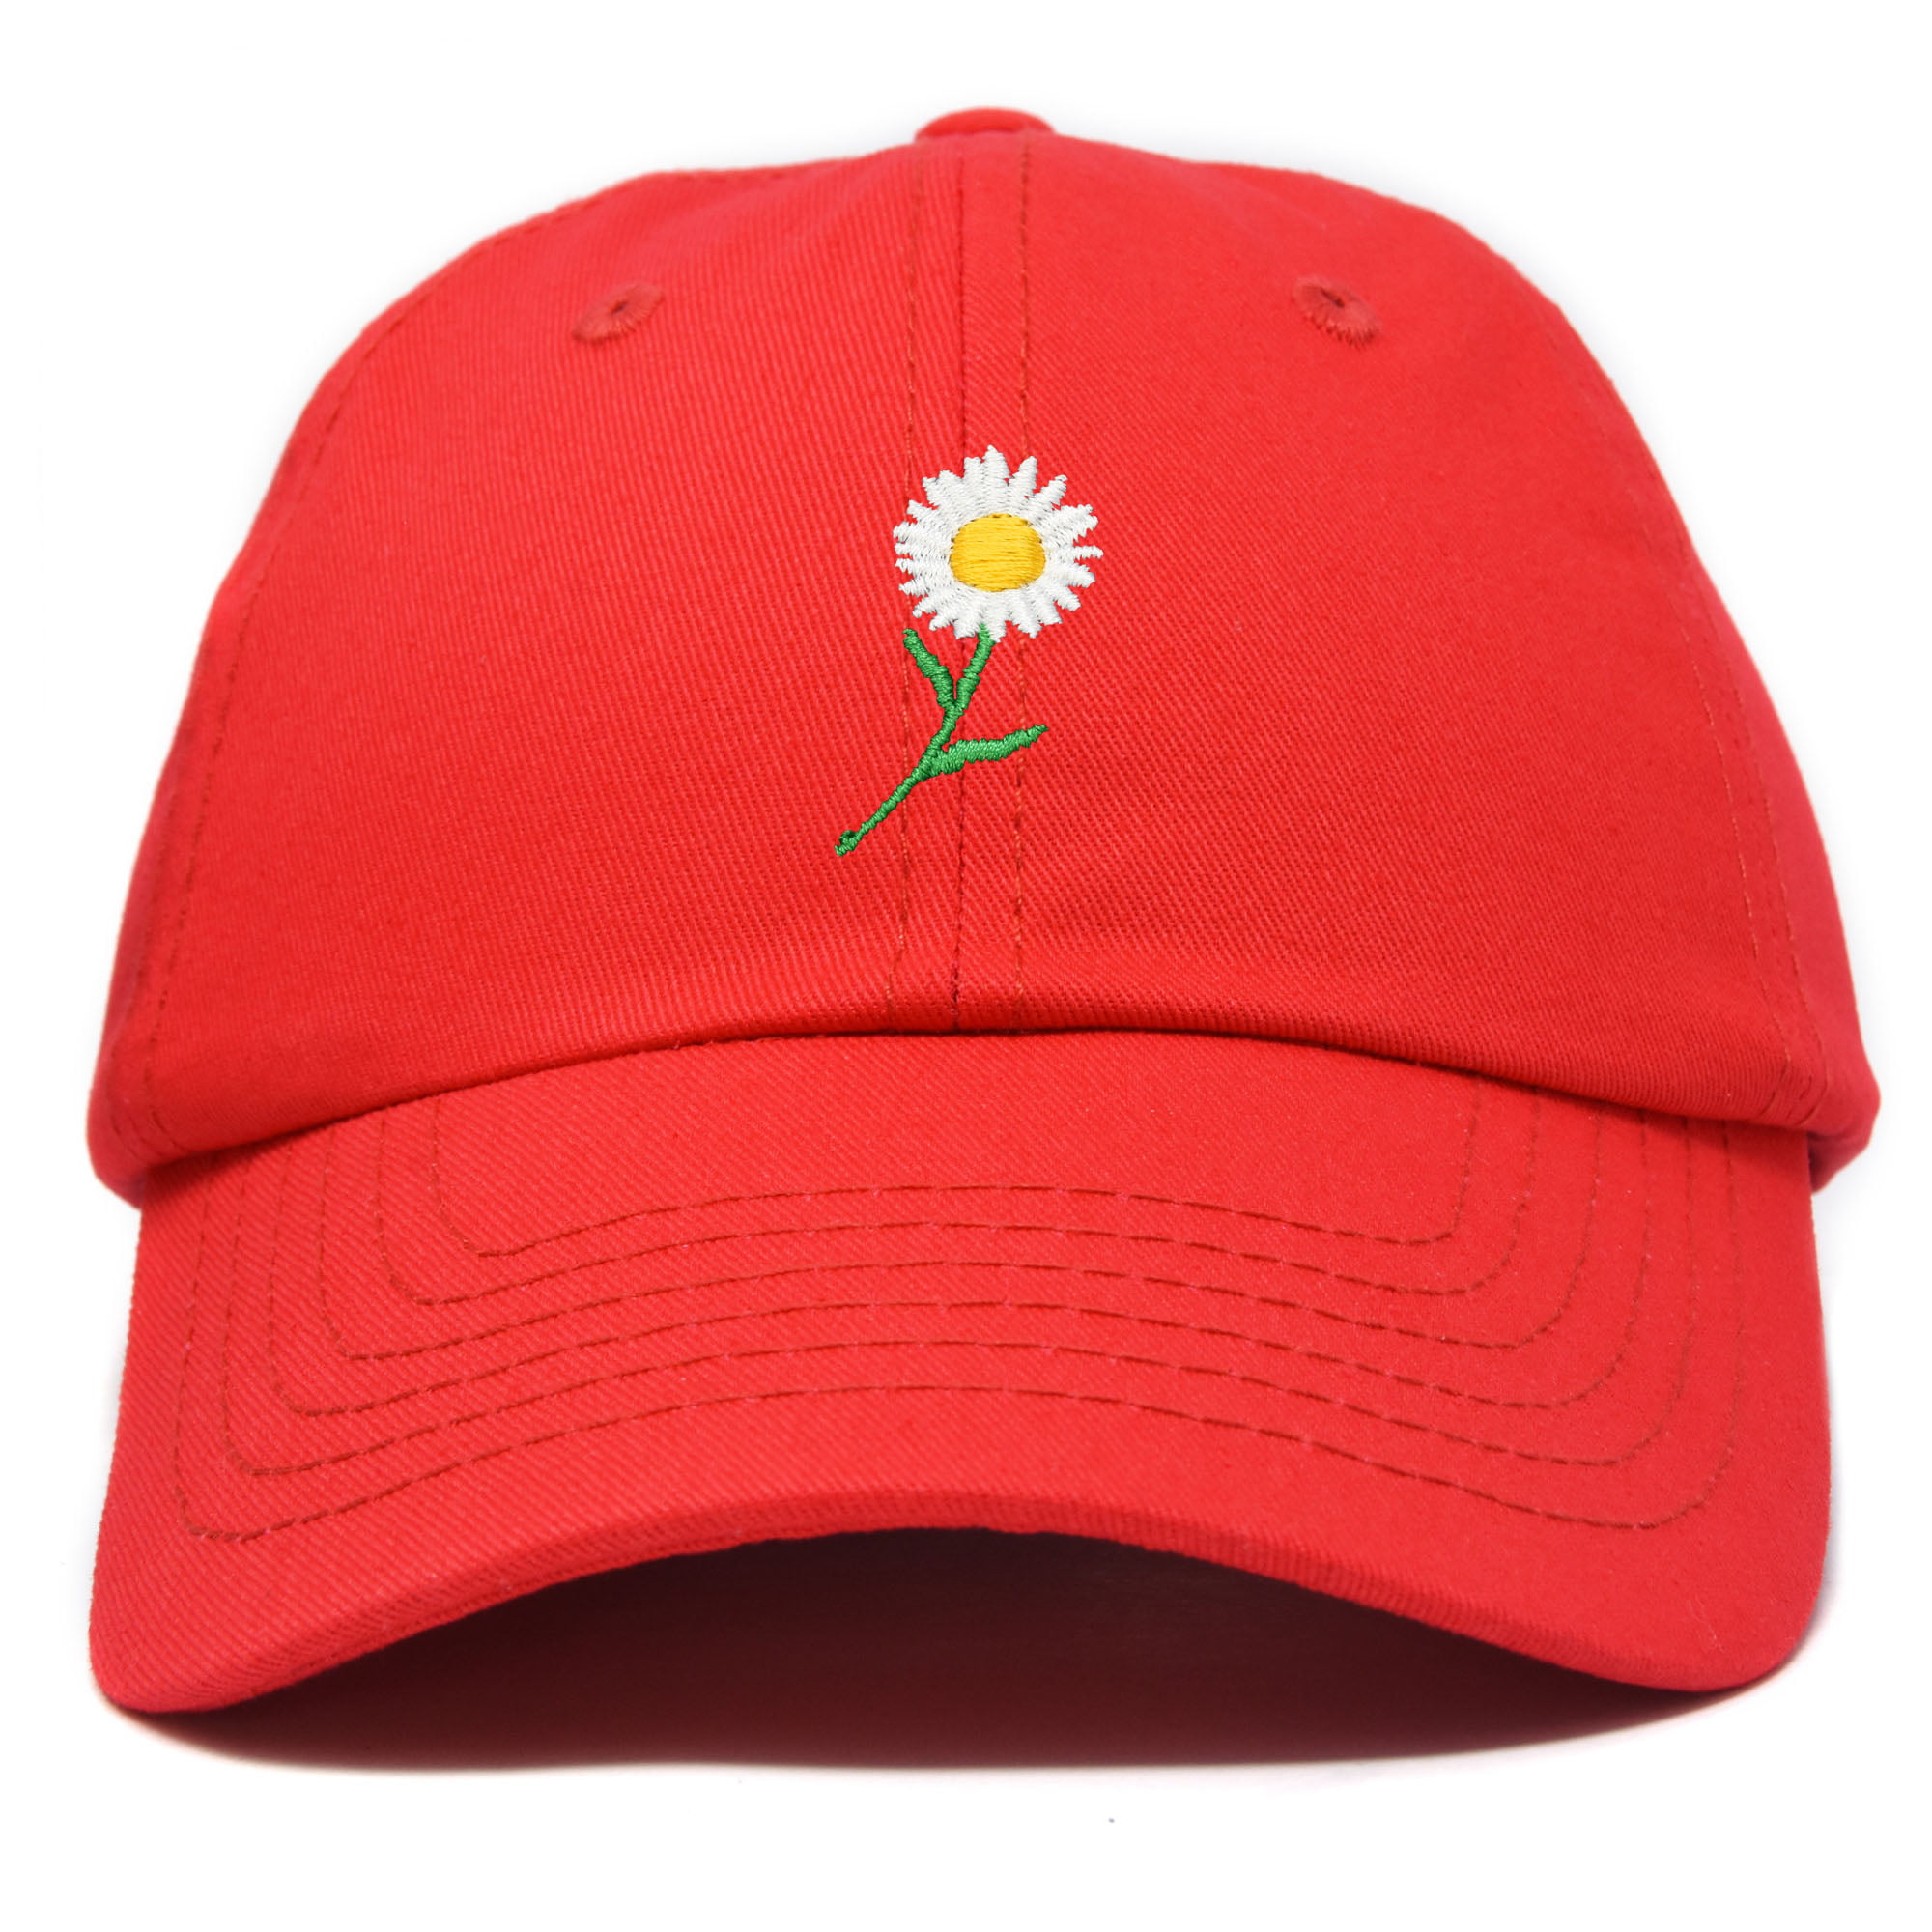 Cap Floral Daisy DALIX Hat in Flower Red Womens Baseball